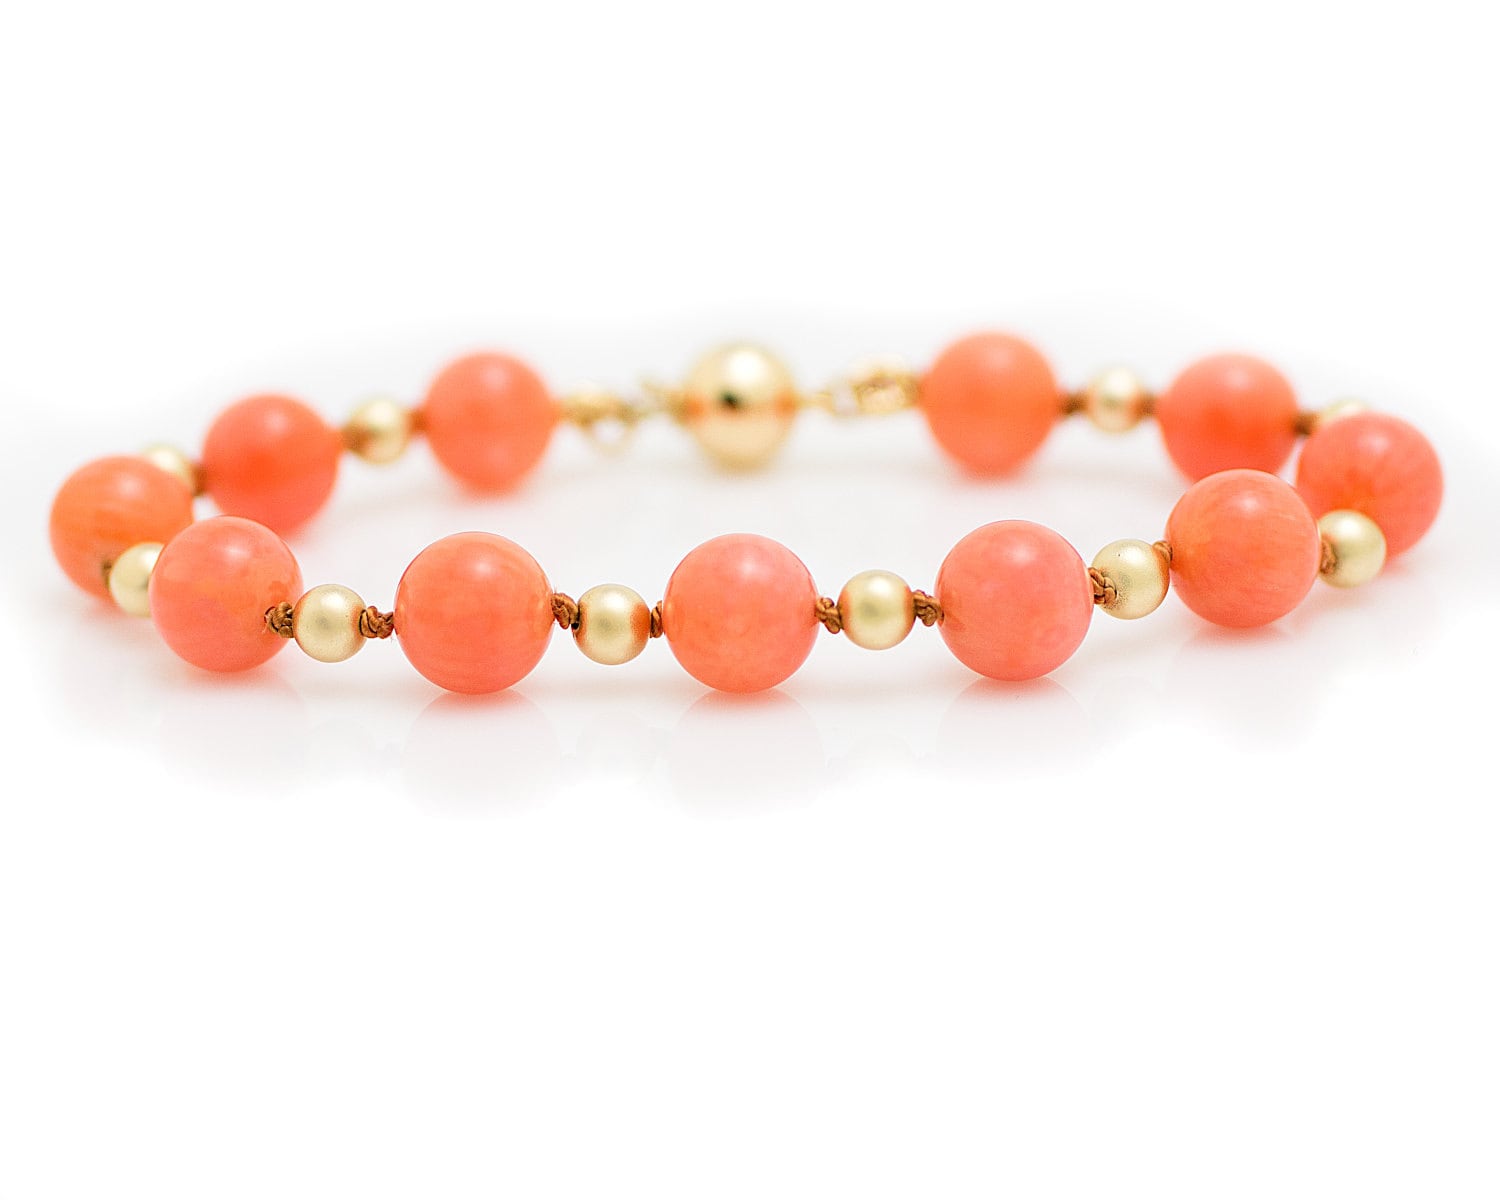  Gold Bracelets on Candy Bracelet   Peach Coral And Gold   Peach Colored Coral   14k Gold